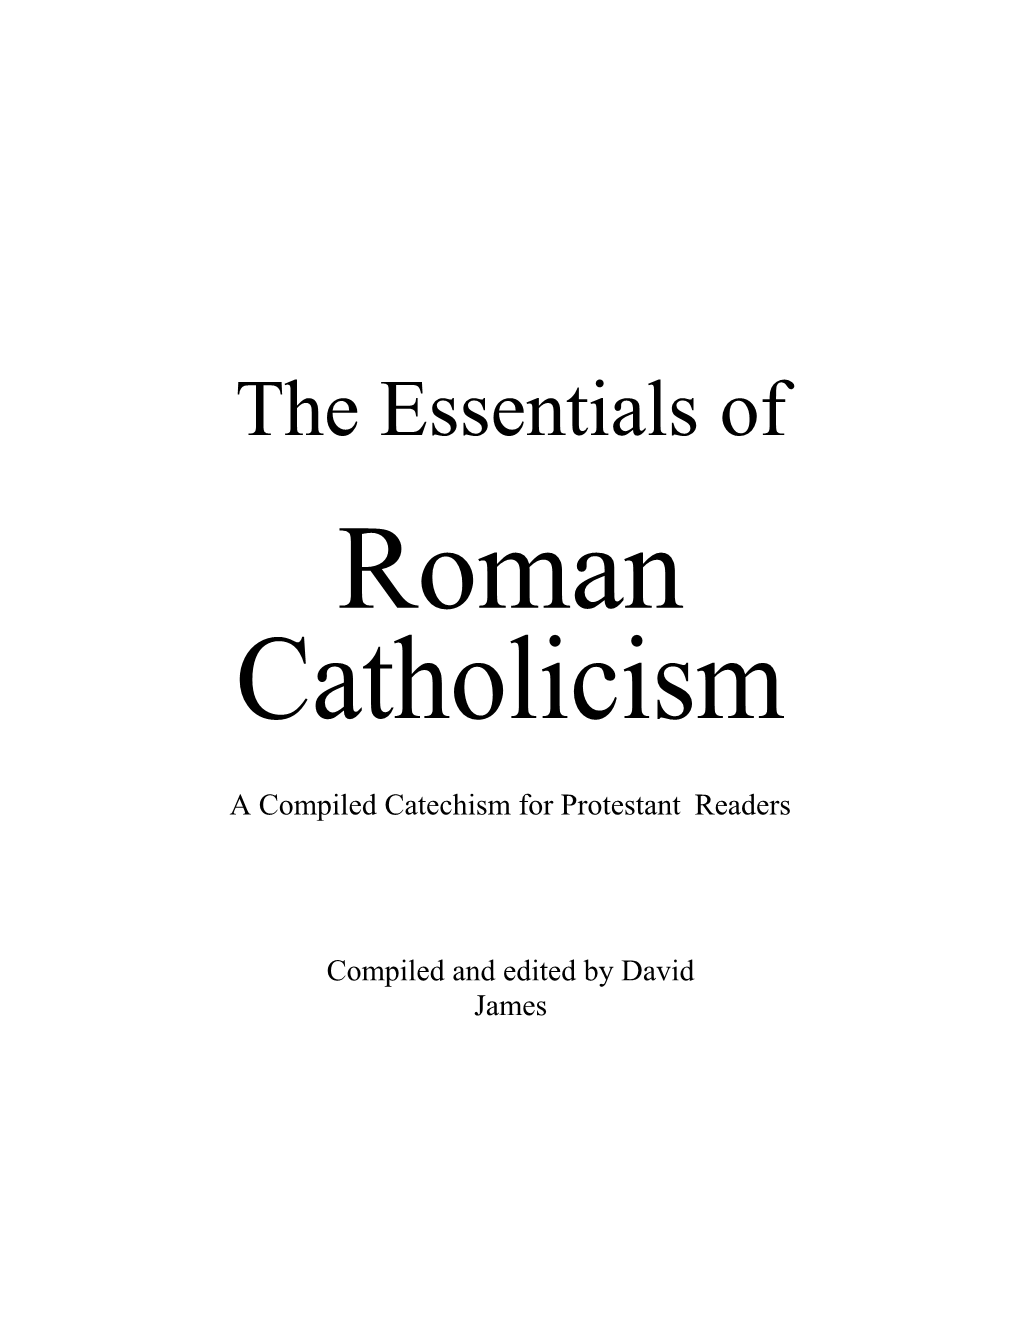 A Compiled Catechism for Protestantreaders